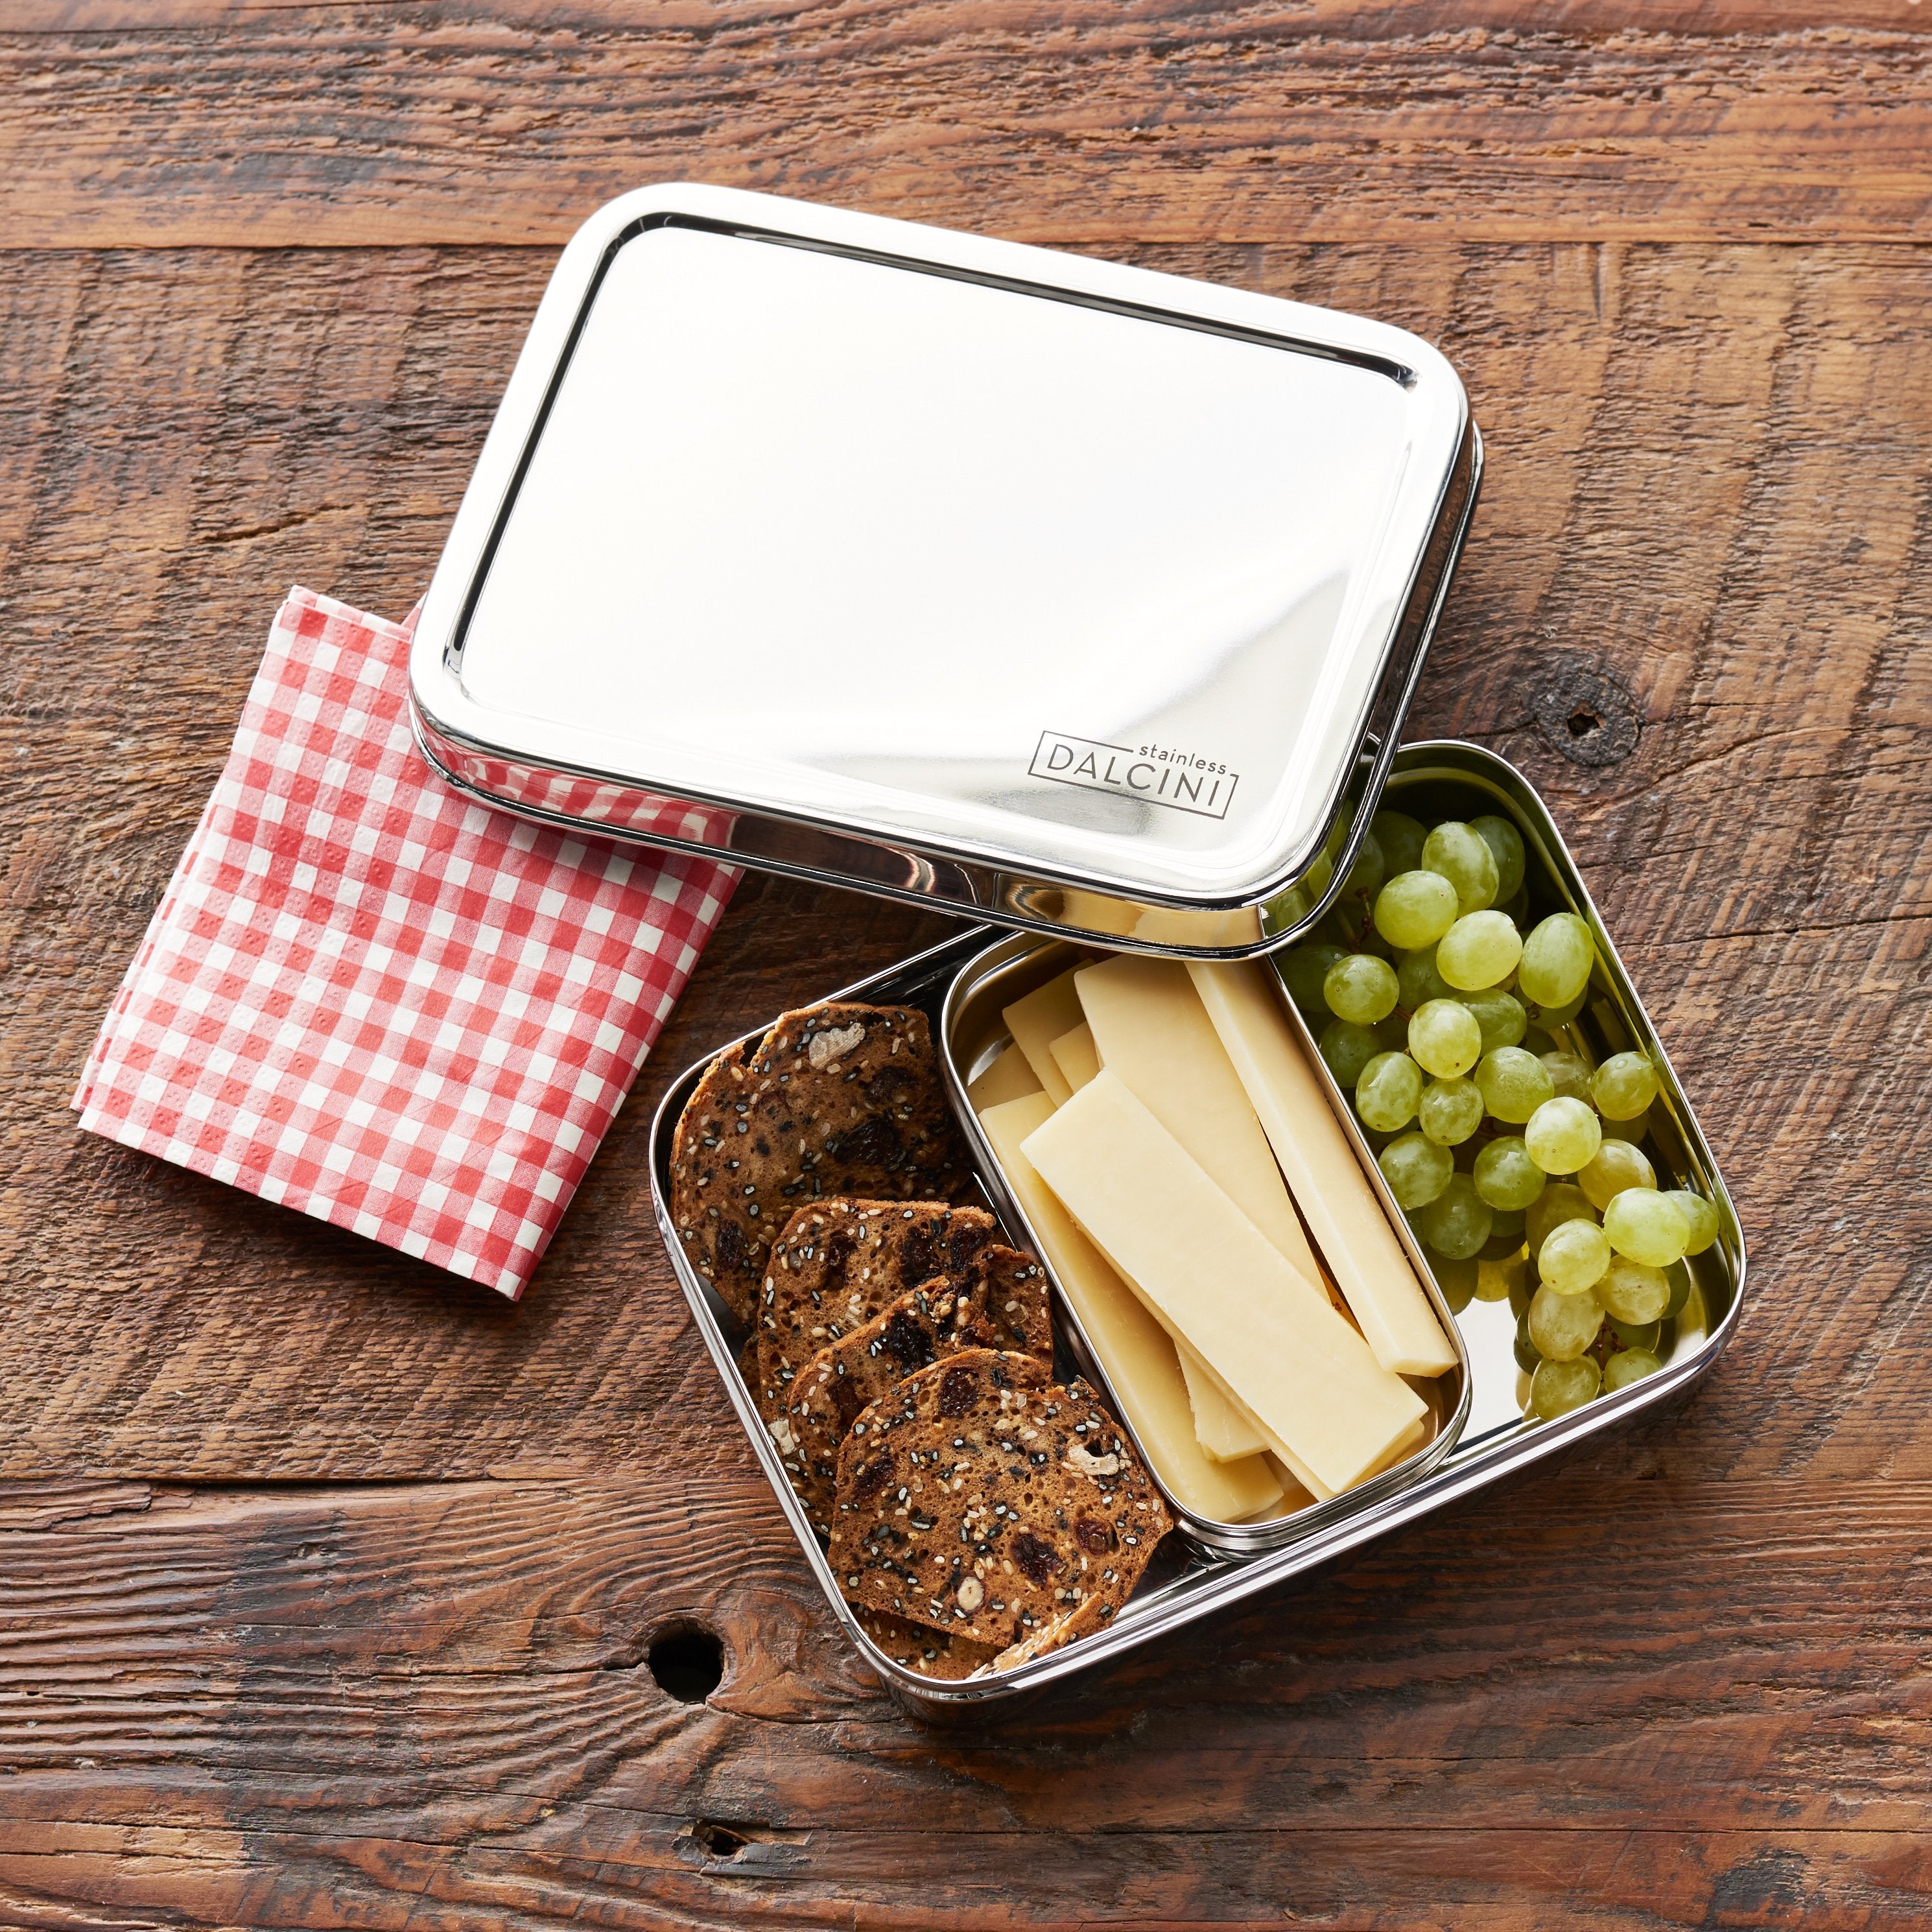 Dalcini Stainless Stainless Steel Bistro Lunch Box